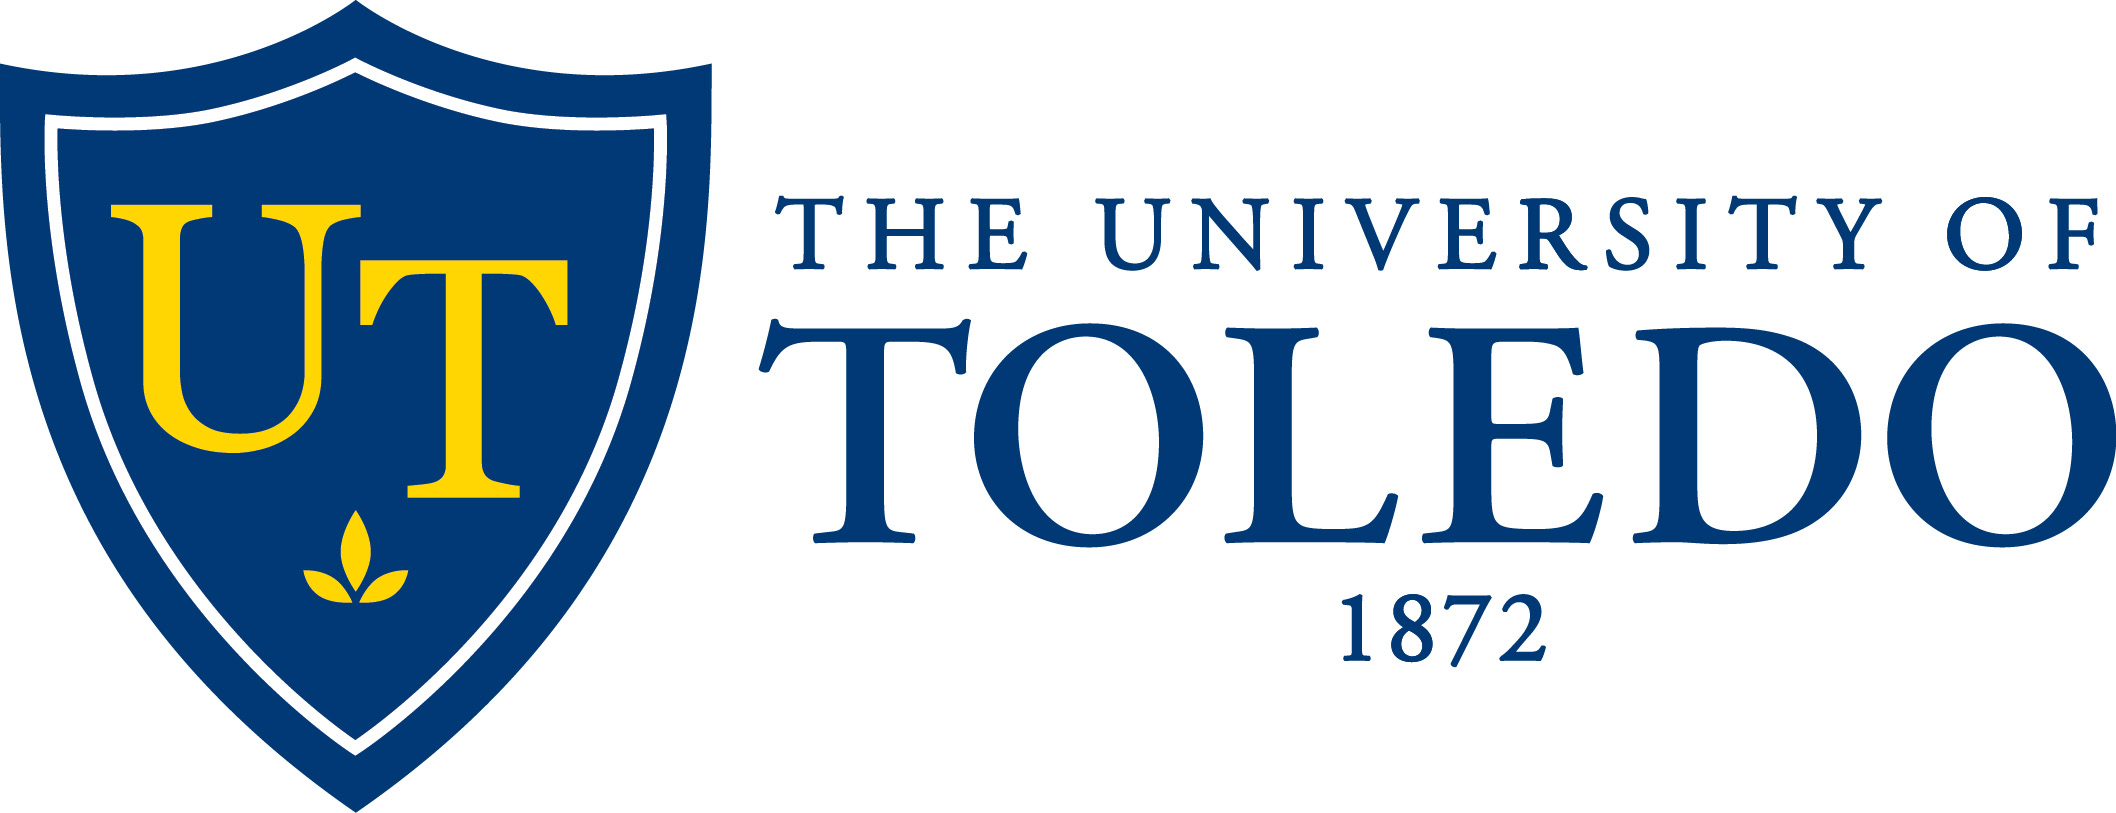 University of Toledo Finance and Accounting Degrees, Accreditation